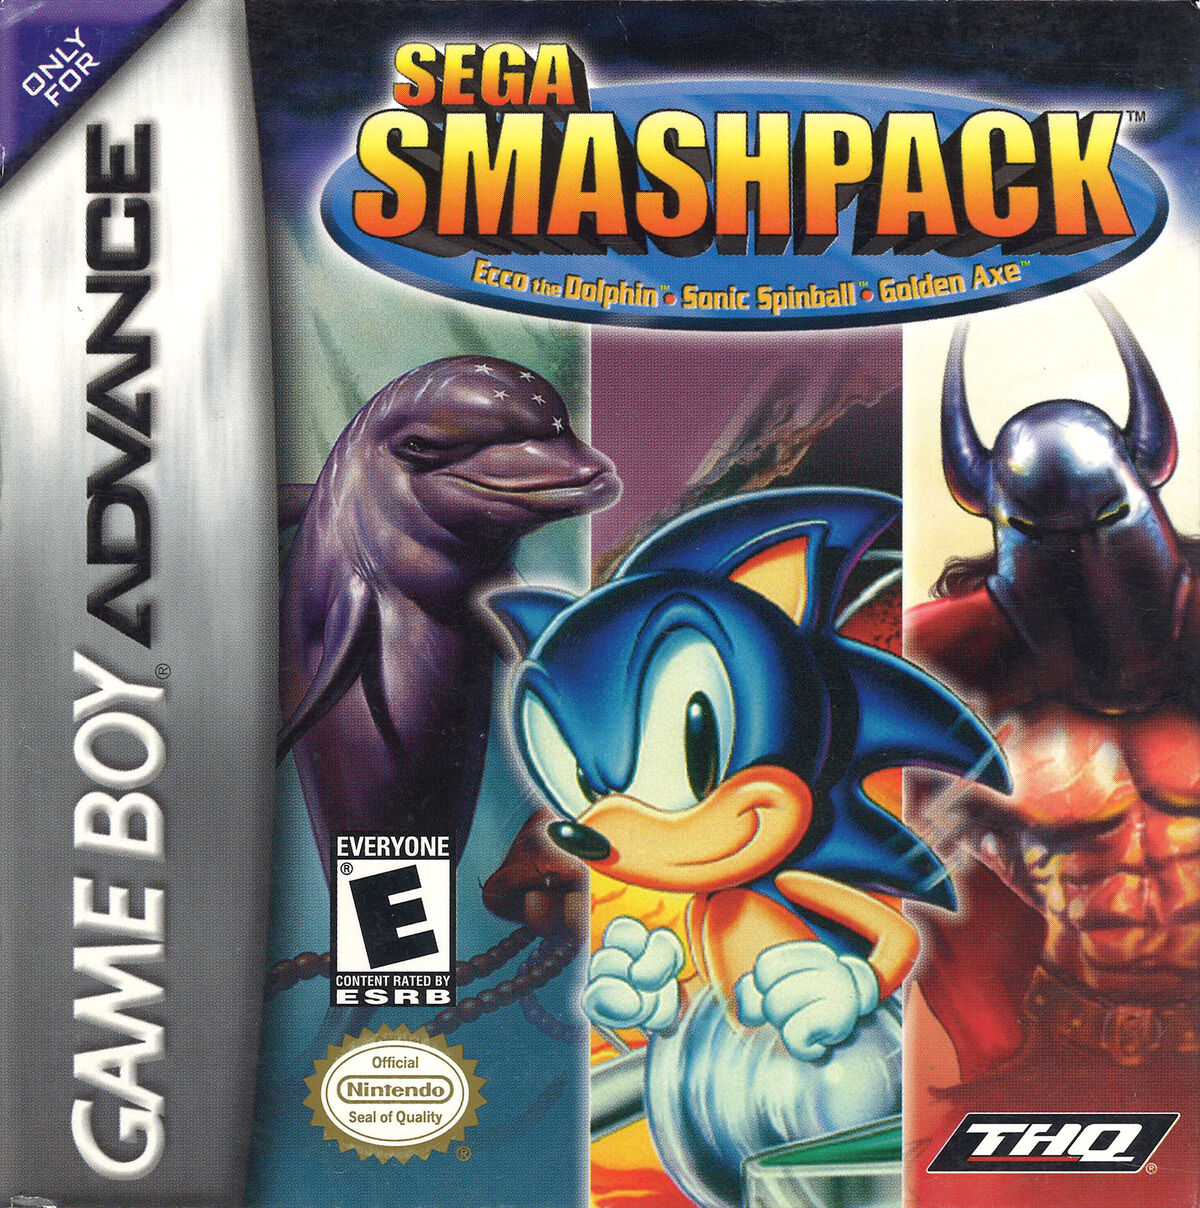 Sonic the Hedgehog Genesis Game Boy Advance Review – Games That I Play